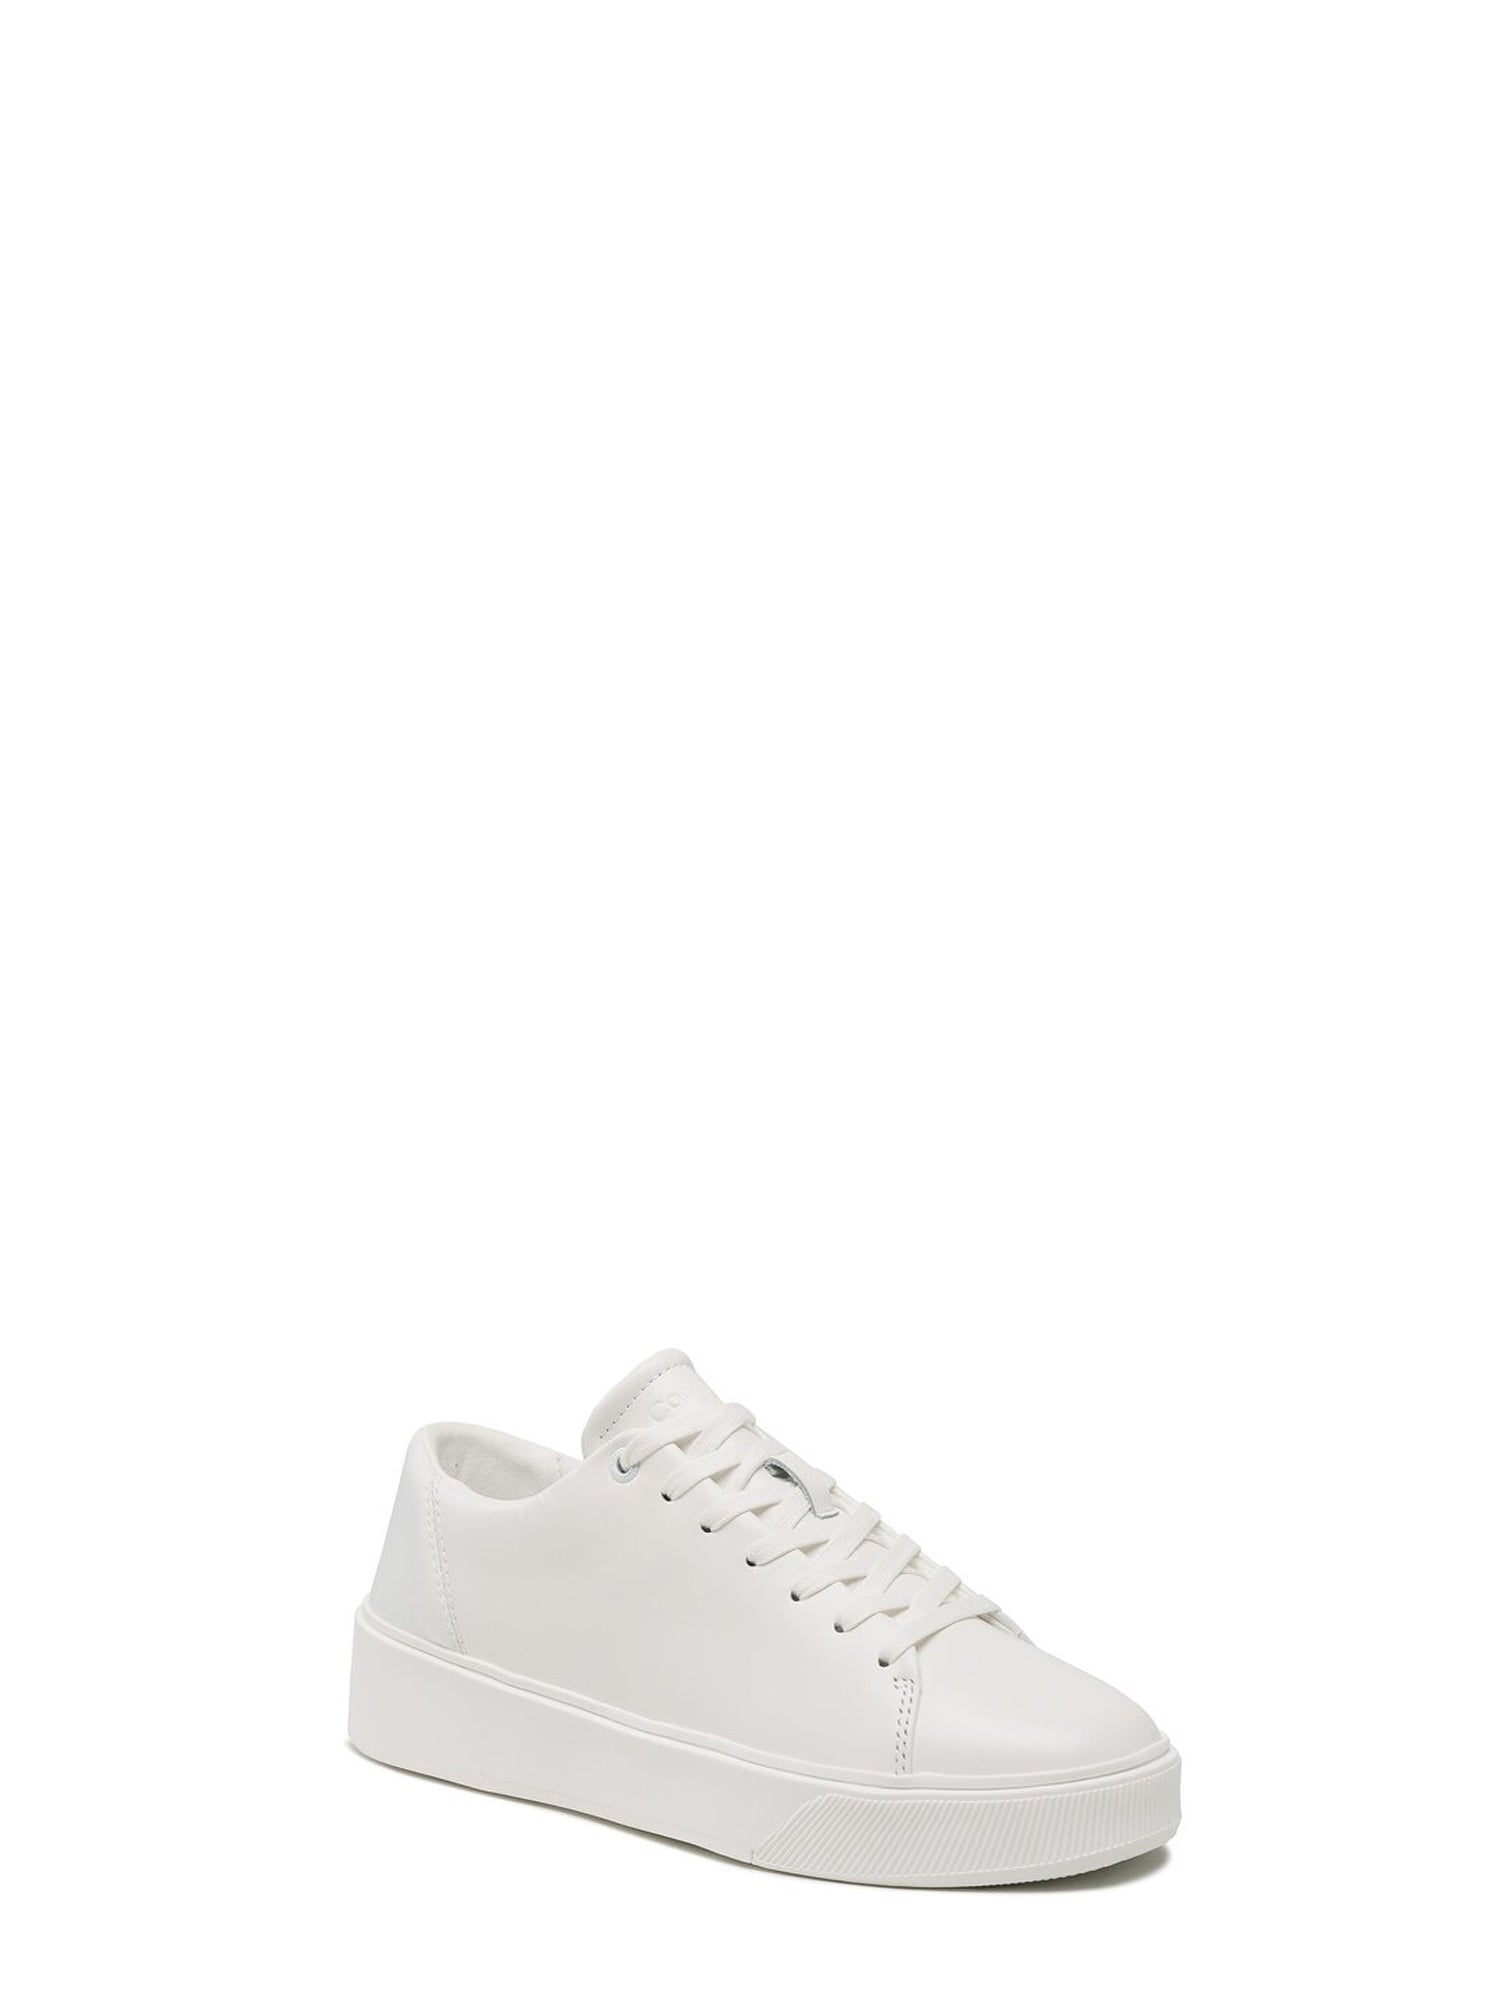 CALVIN KLEIN SHOES SNEAKERS LOW TOP LACE UP LTH BIANCO